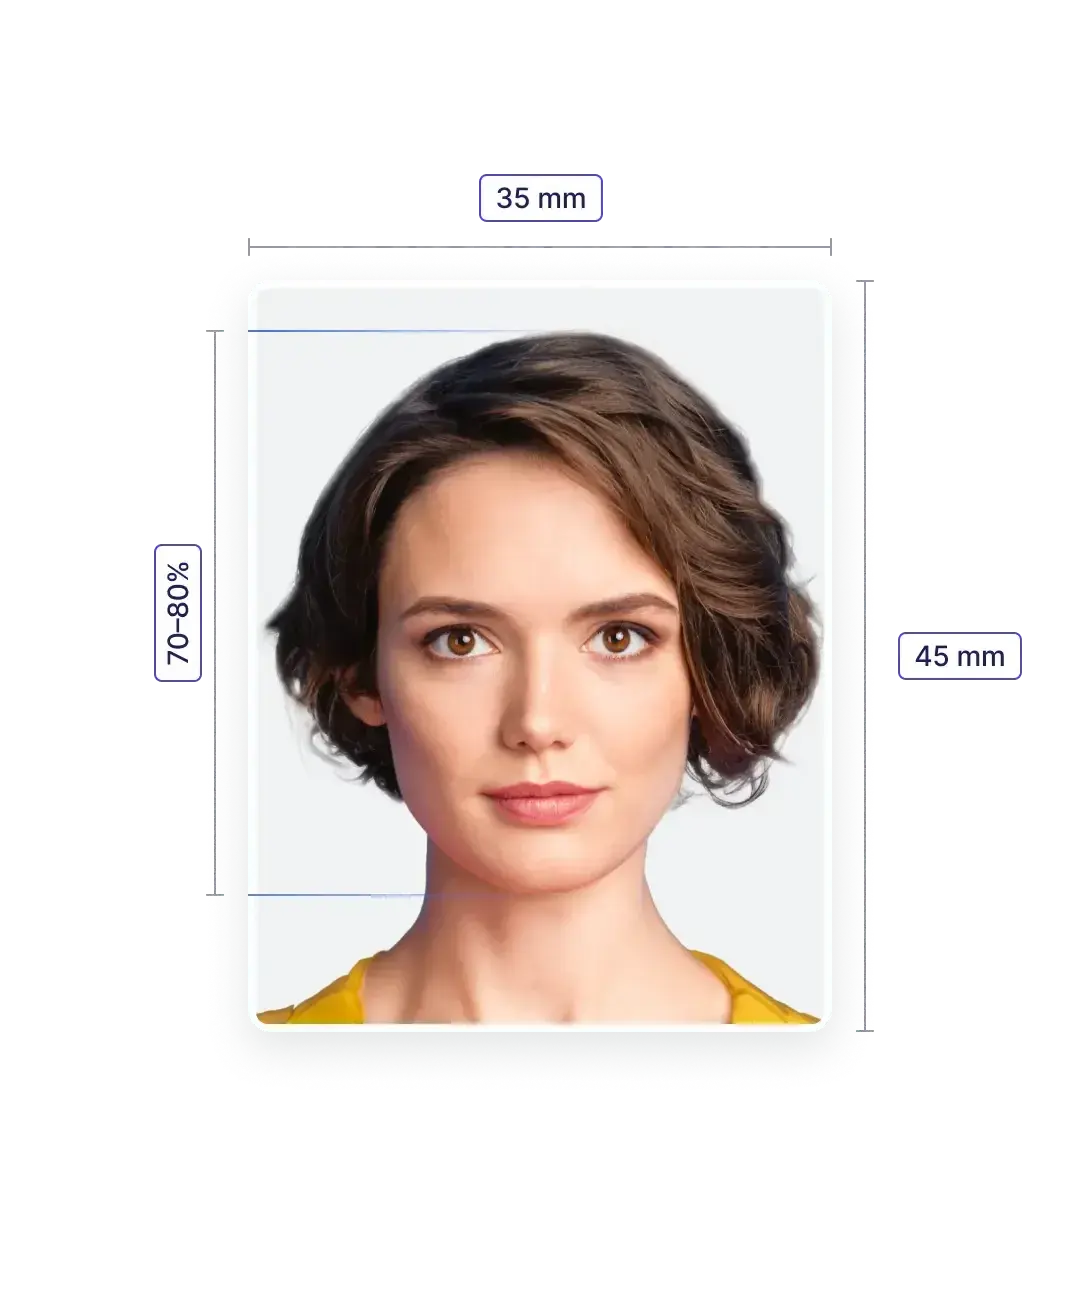 French Passport Photo—Specifications